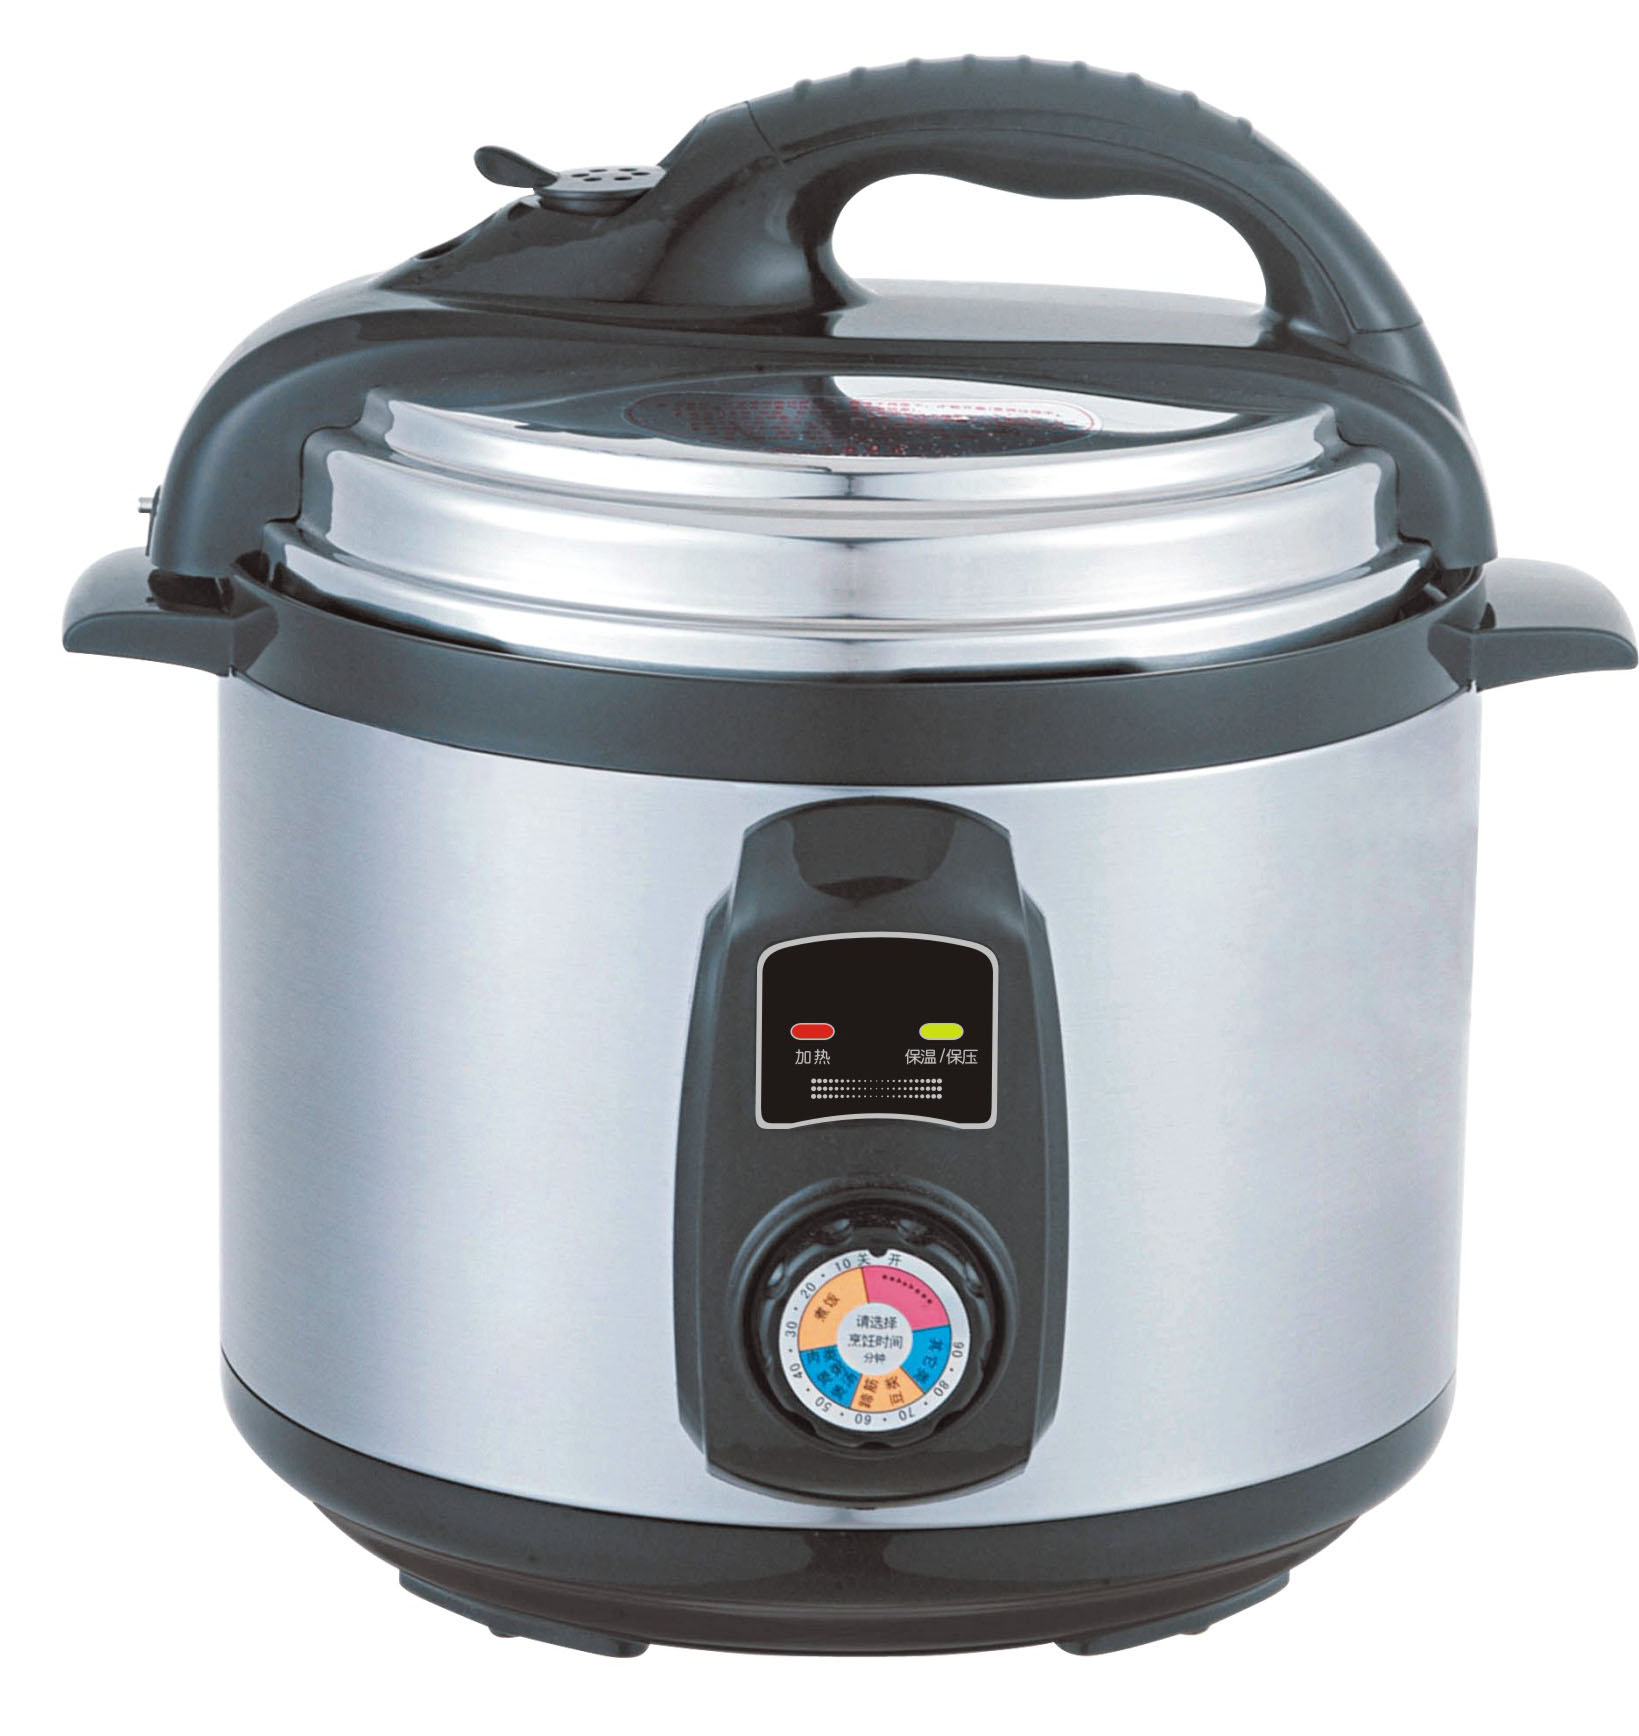 Digital Rice Cooker and Food Steamer, extral thick Stainless Steel Exterior electric pressure cooker